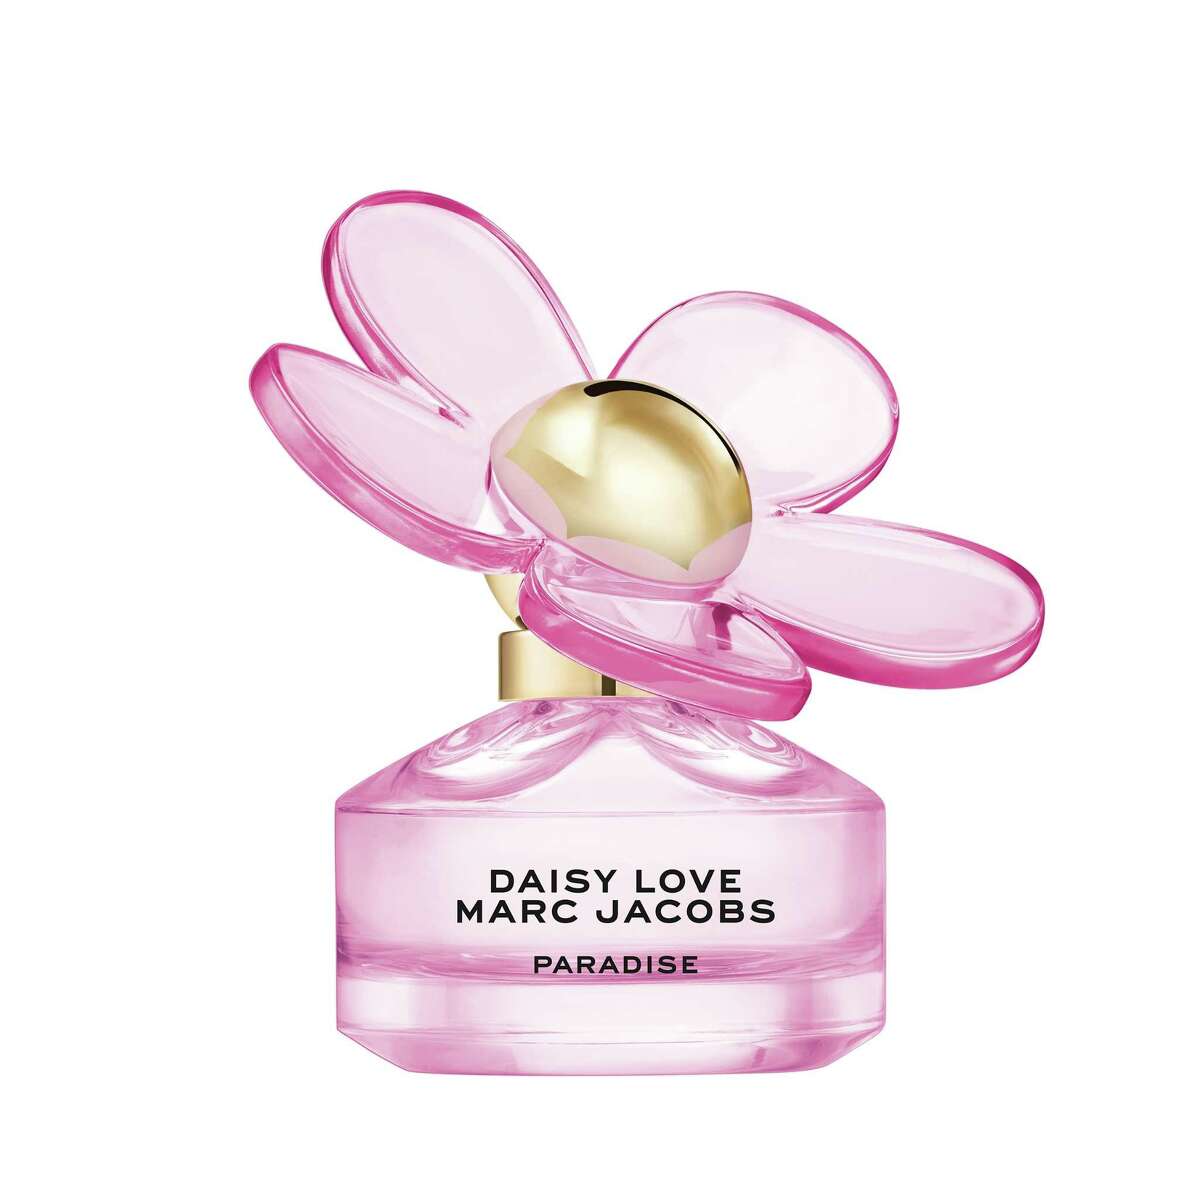 Daisy Love Marc Jacobs Paradise is a limited edition fragrance marrying iris, patchouli, and chantilly.